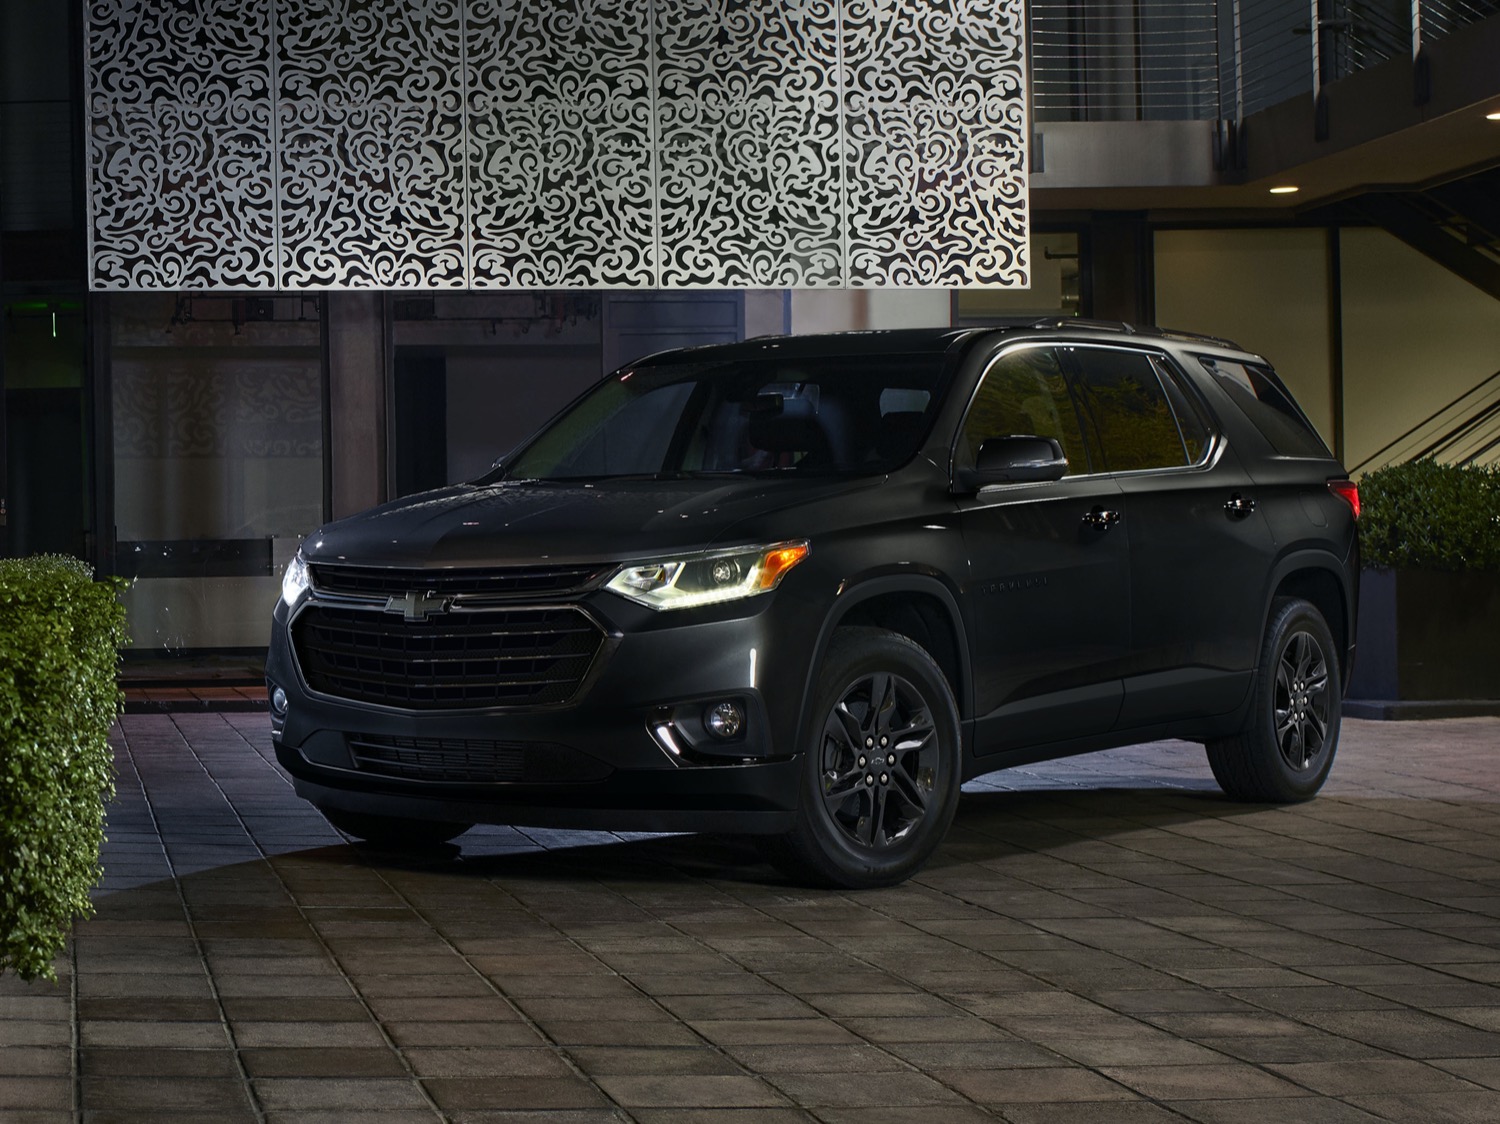 36 HQ Images Chevy Traverse Sport Package : The 2020 Chevy Traverse Trims and Packages | Betley Chevrolet